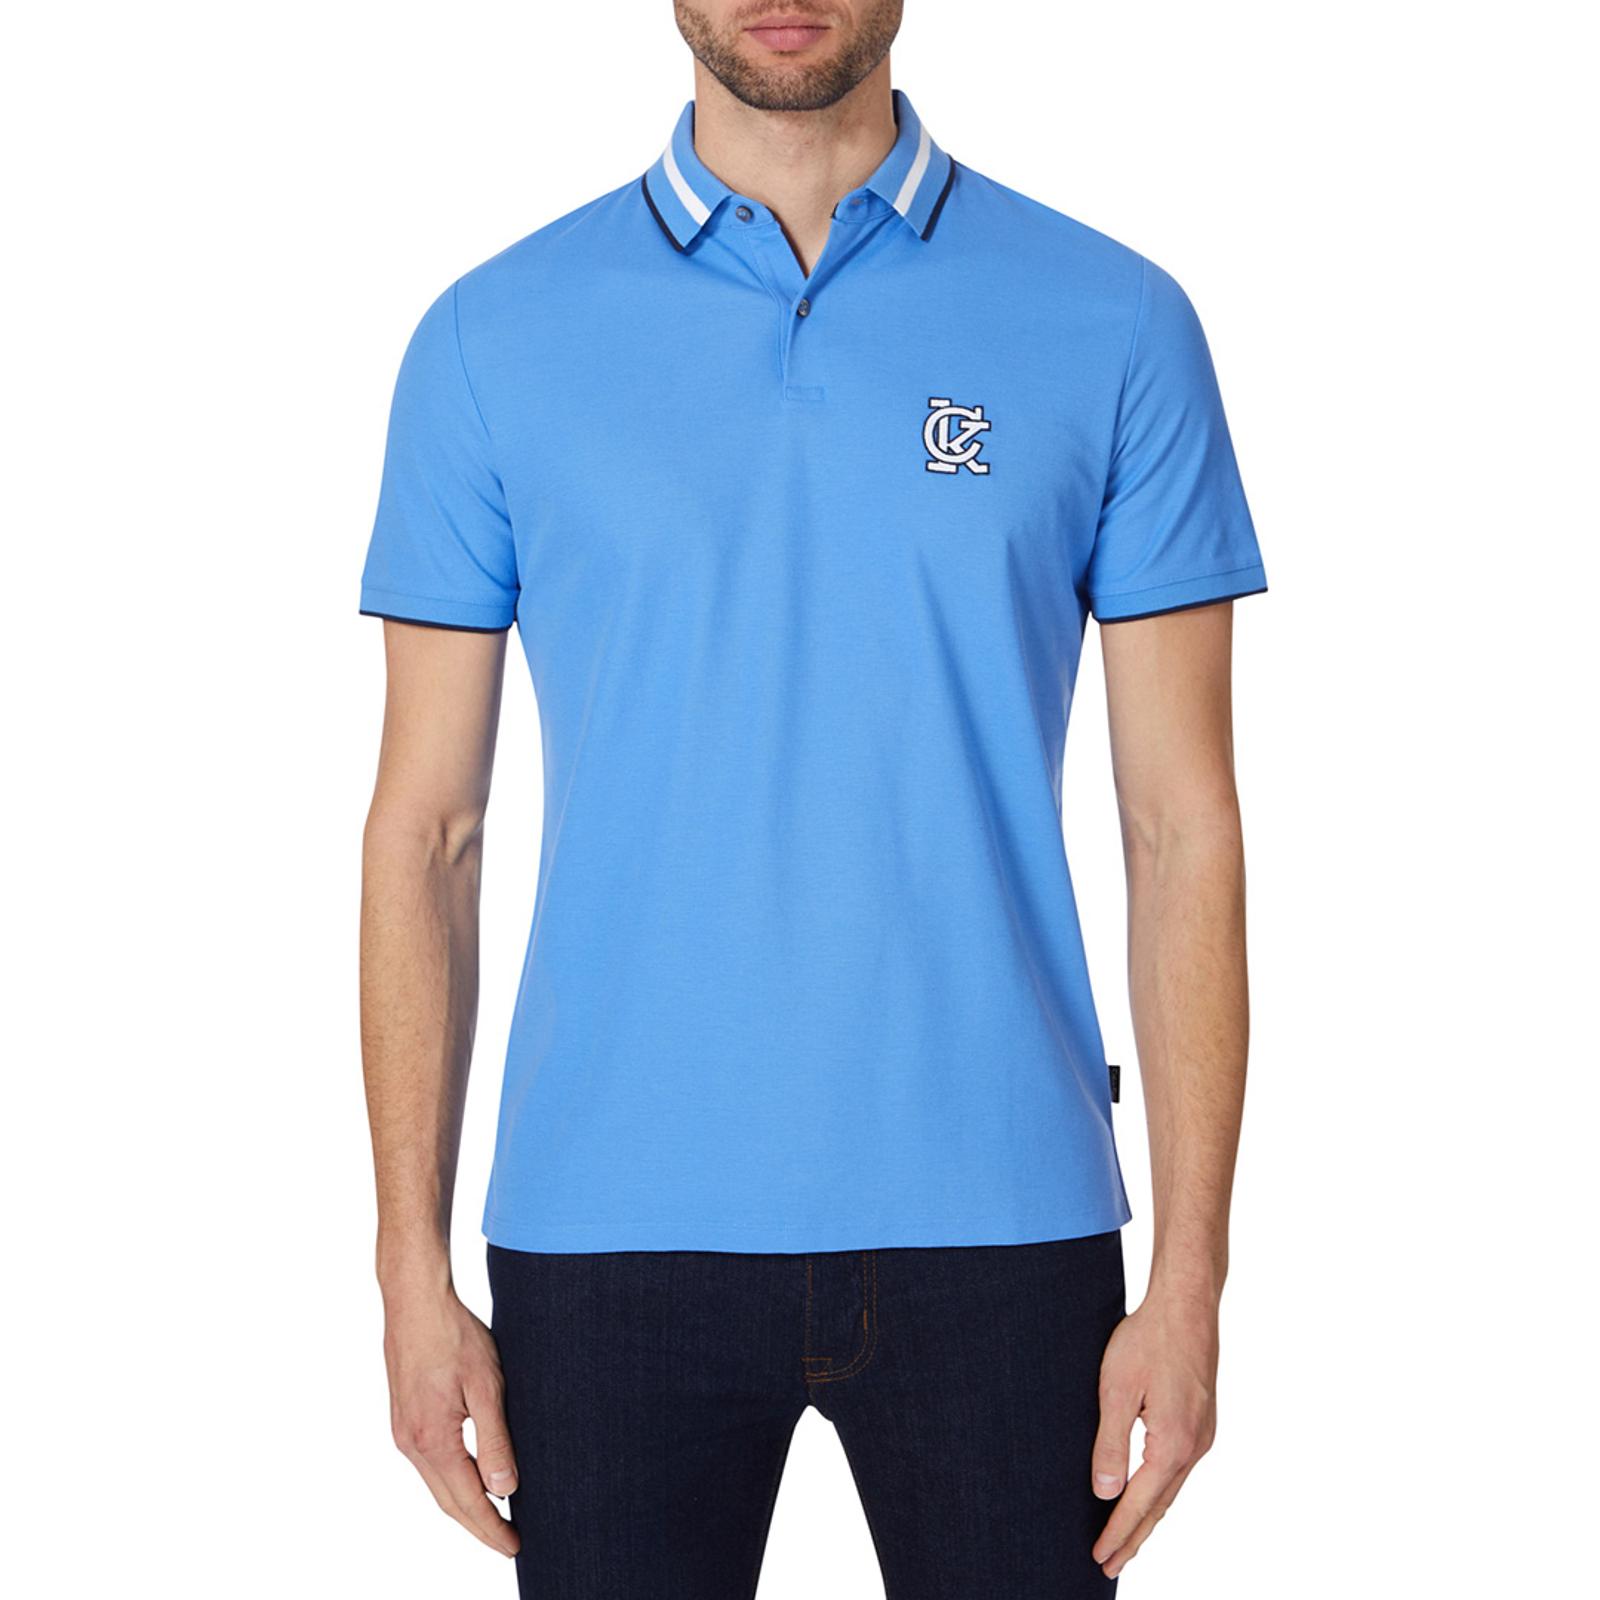 Blue Jals Cotton Polo Top - BrandAlley